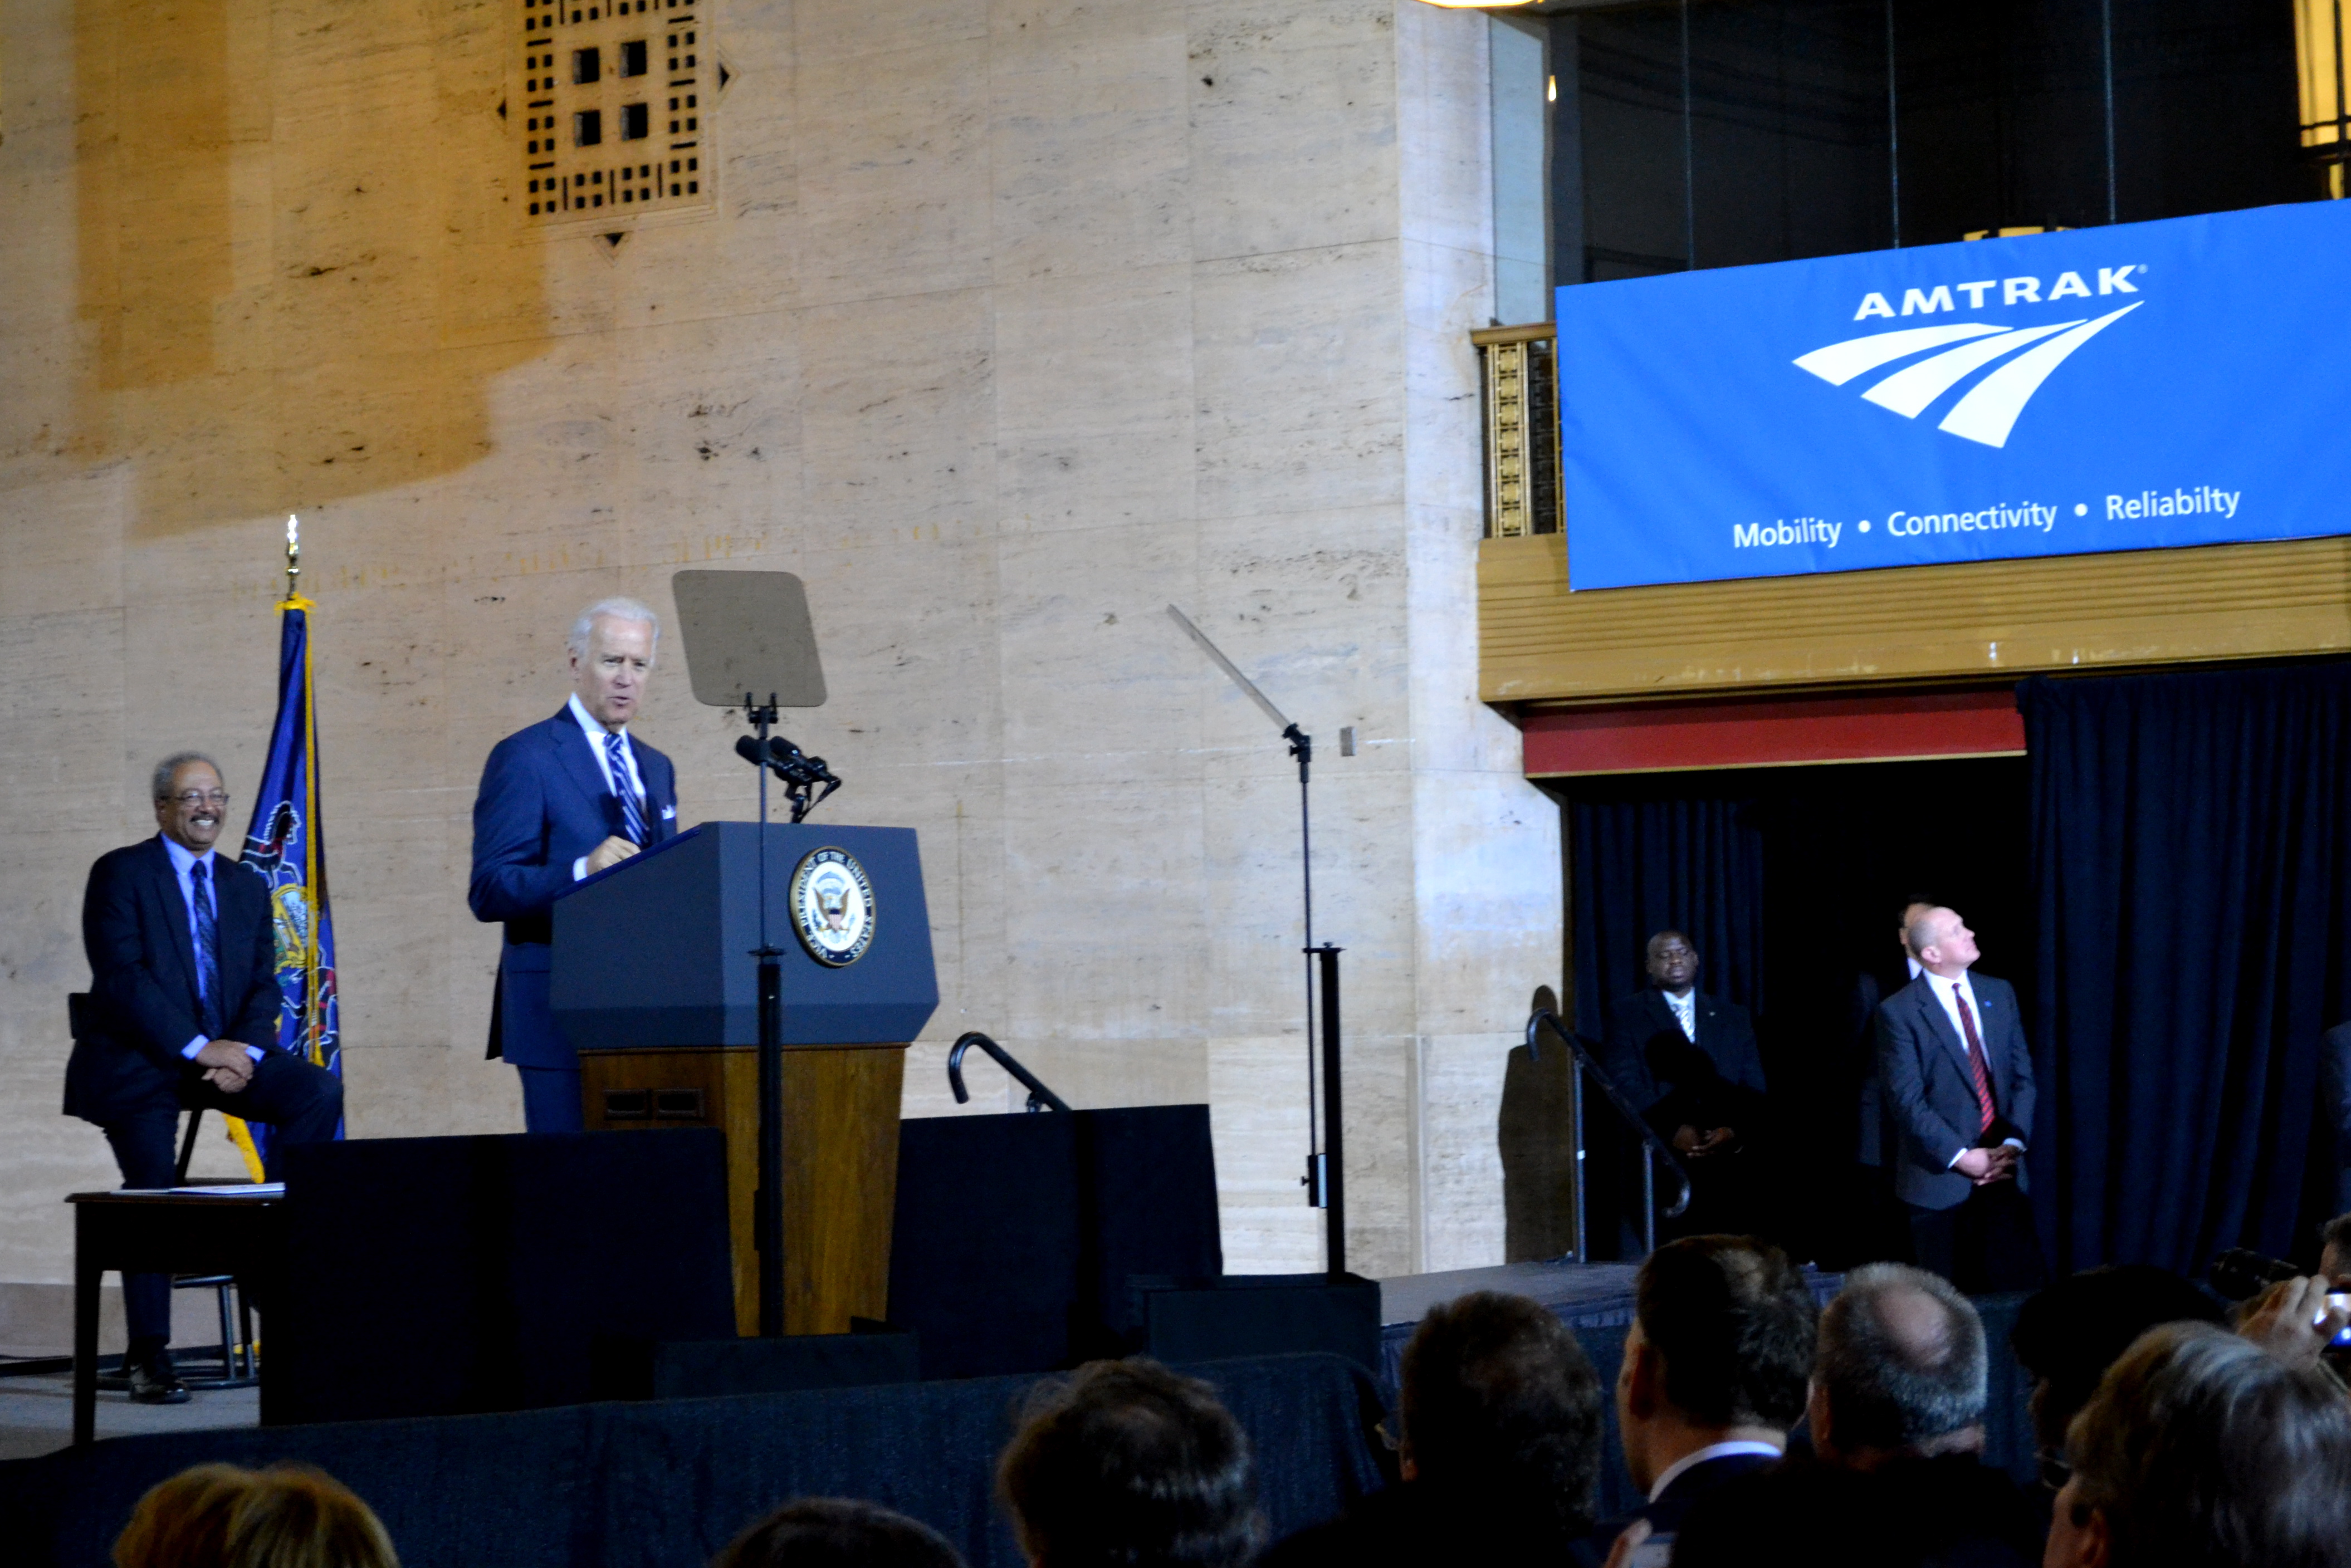 Biden spoke of the importance of investing in and modernizing rail infrastructure 